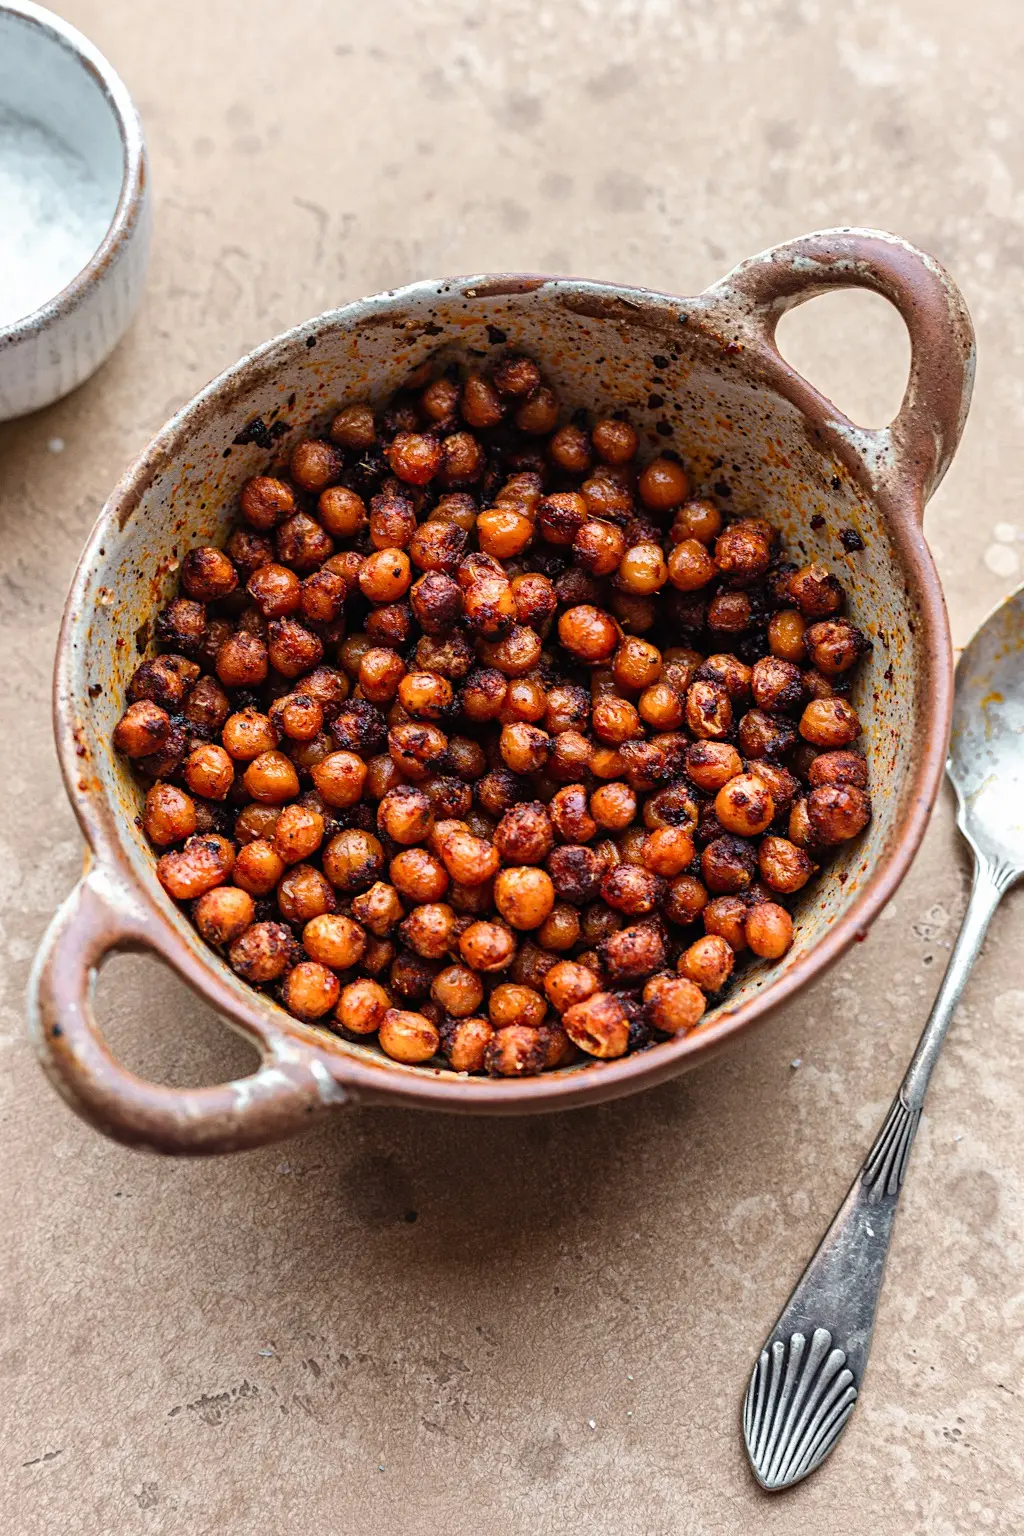 buy smoked chickpeas - What's the difference between canned chickpeas and chickpeas